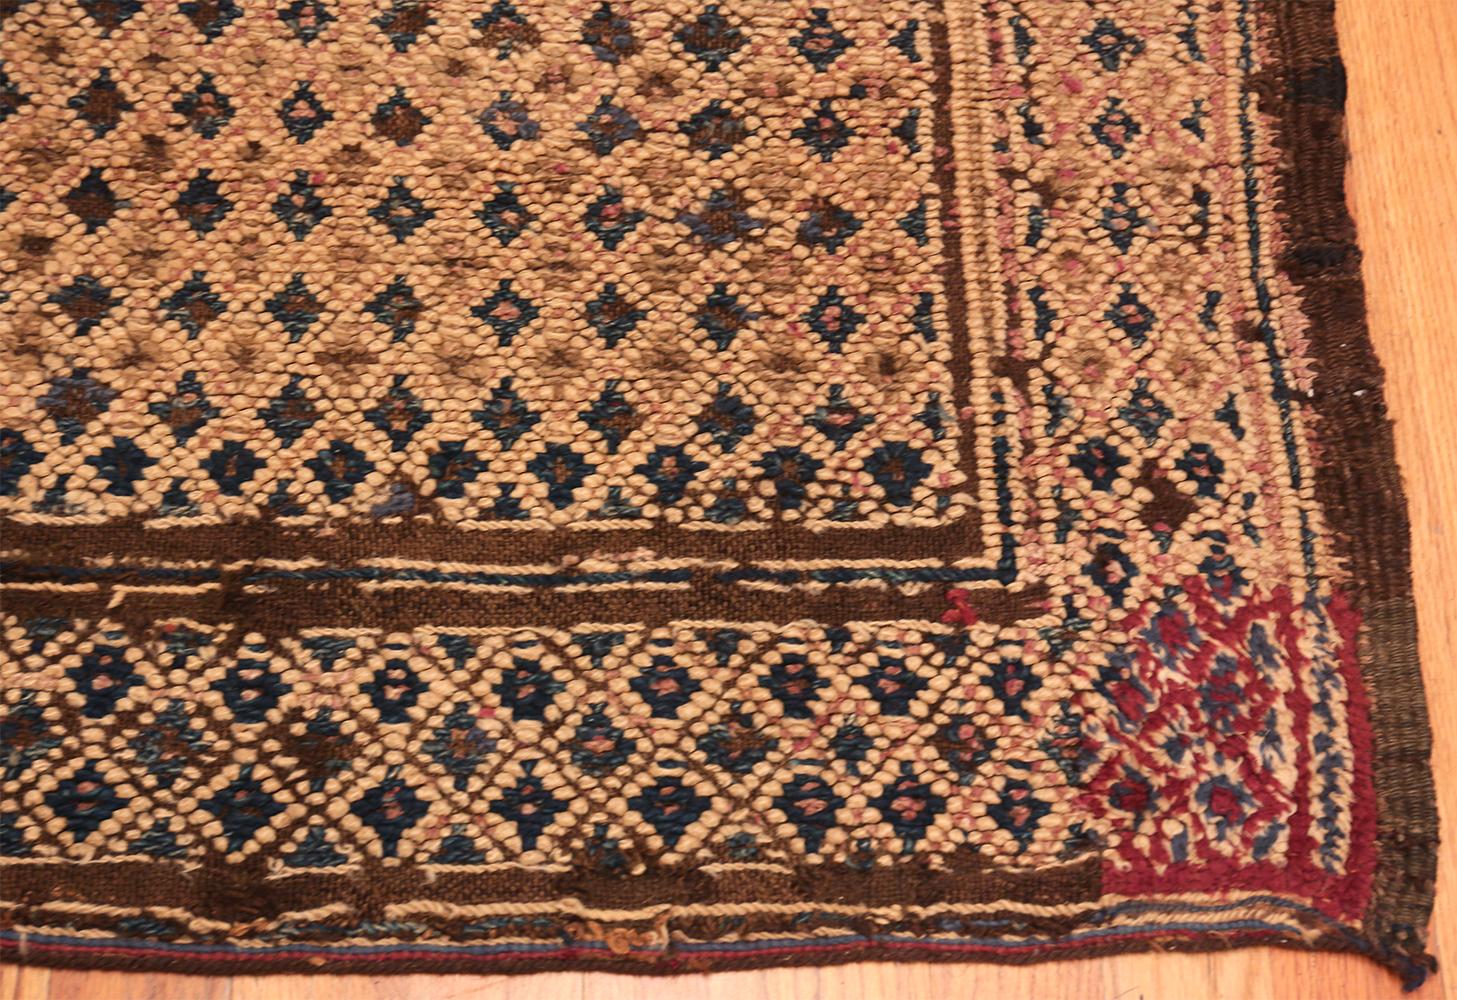 Hand-Knotted Vintage Brown Geometric Moroccan Rug. 5 ft 9 in x 10 ft For Sale